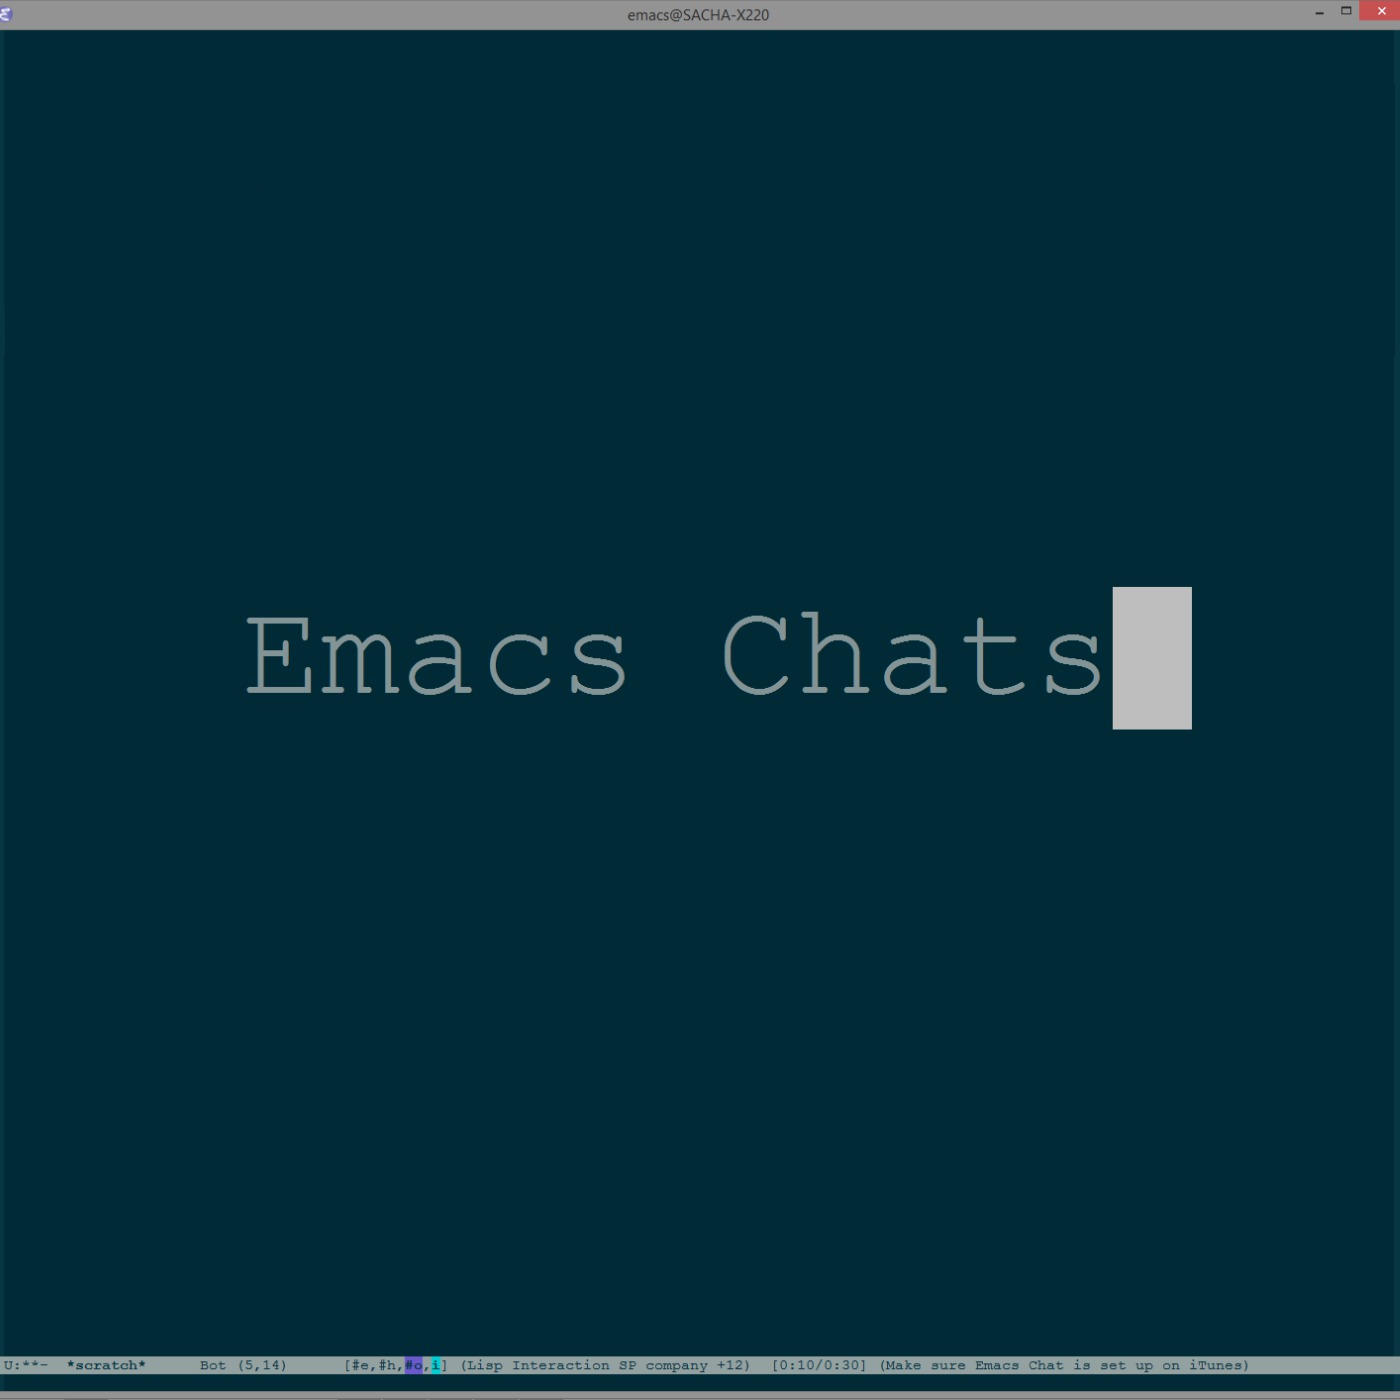 Sacha Chua - category - emacs-chat-podcast